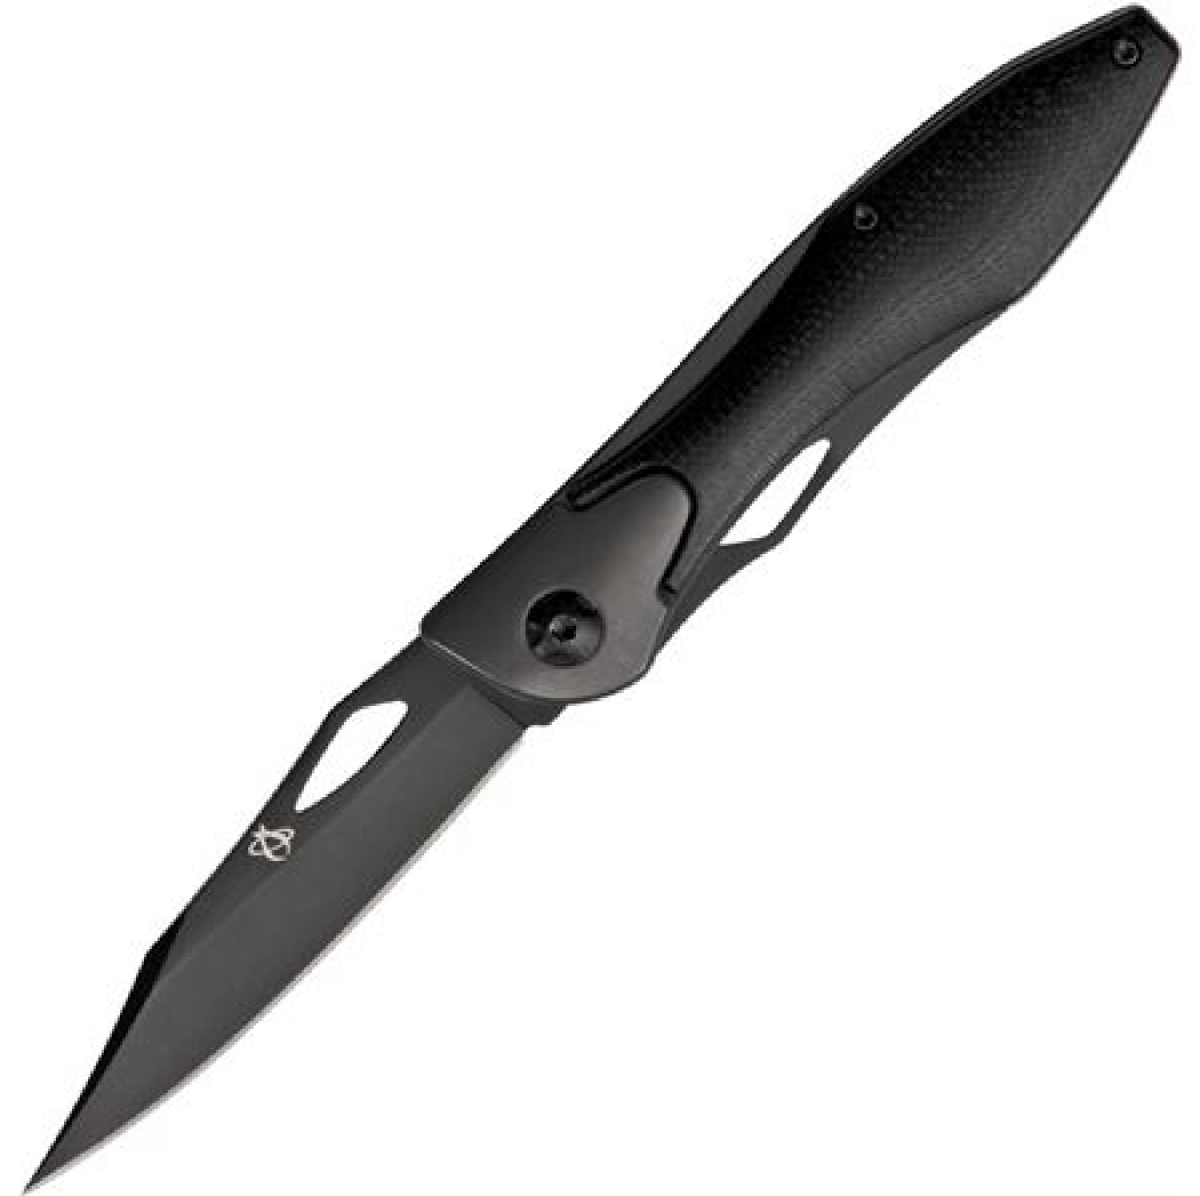 4019460 3 In. Classier Act Folder Knife Blade With G10 Handle, Black